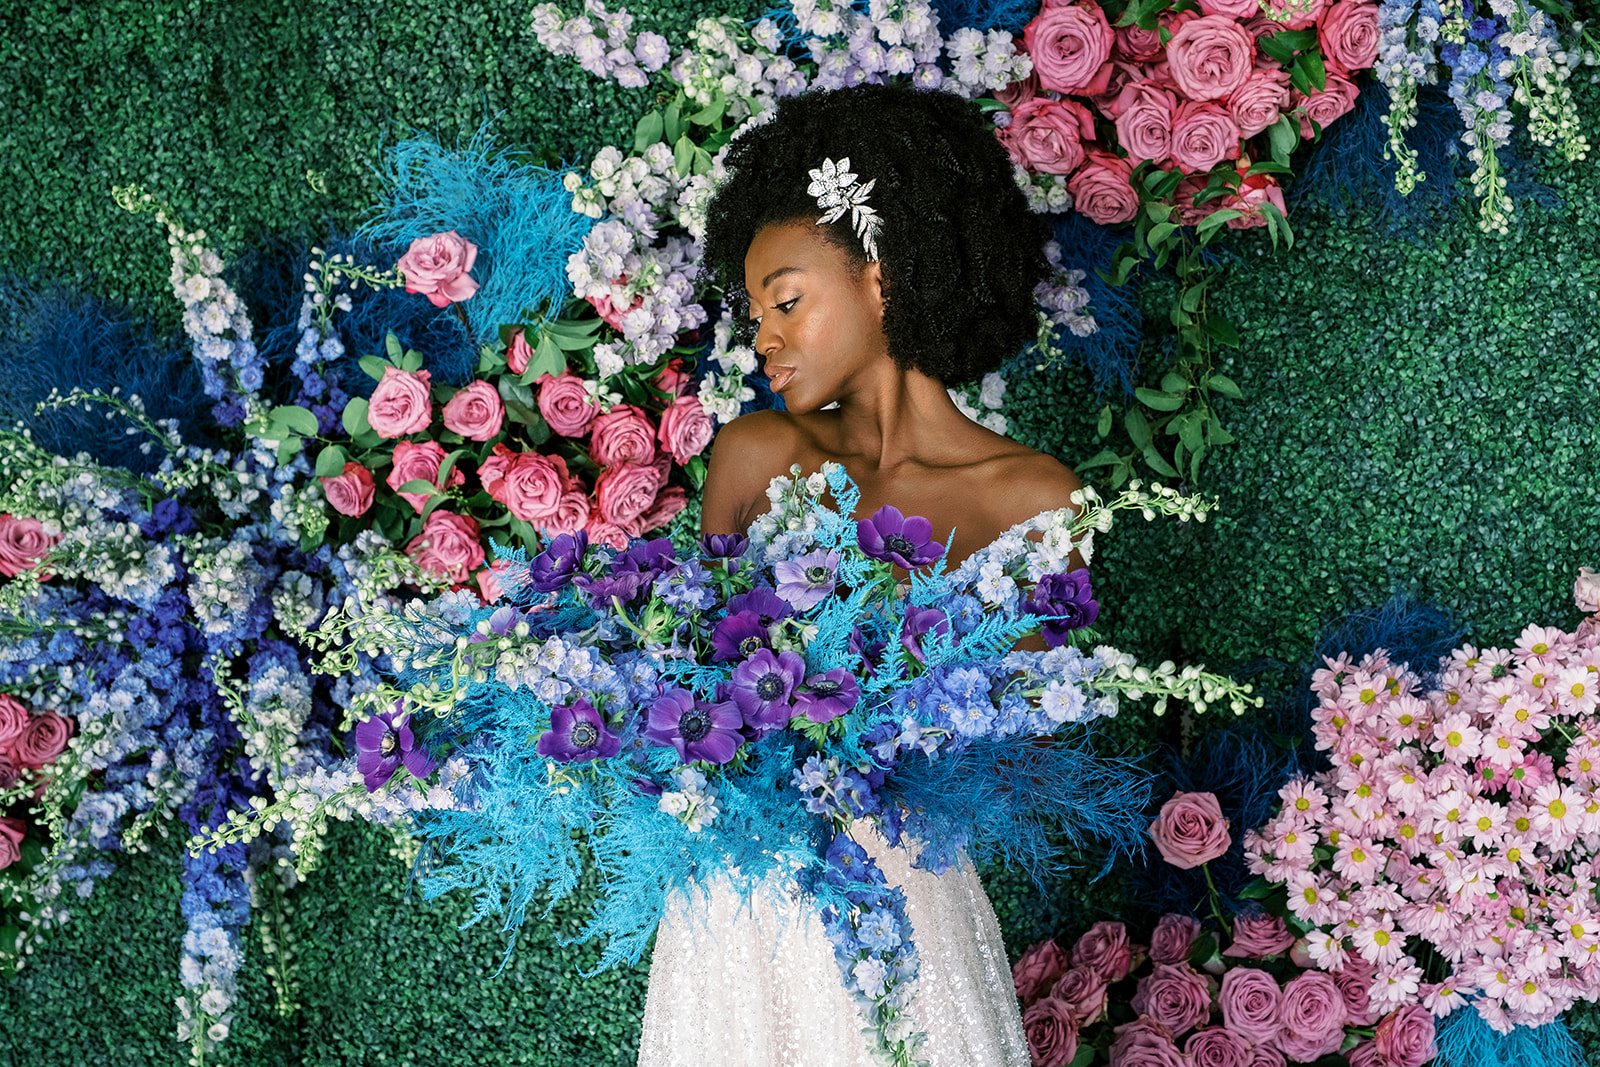 Thinking about your dream wedding flowers? We've got you covered 🌸🦋

 Whether you're envisioning something extravagant or whimsical, we're here to bring your floral ideas to life. Let's work together to create something beautiful for your special d